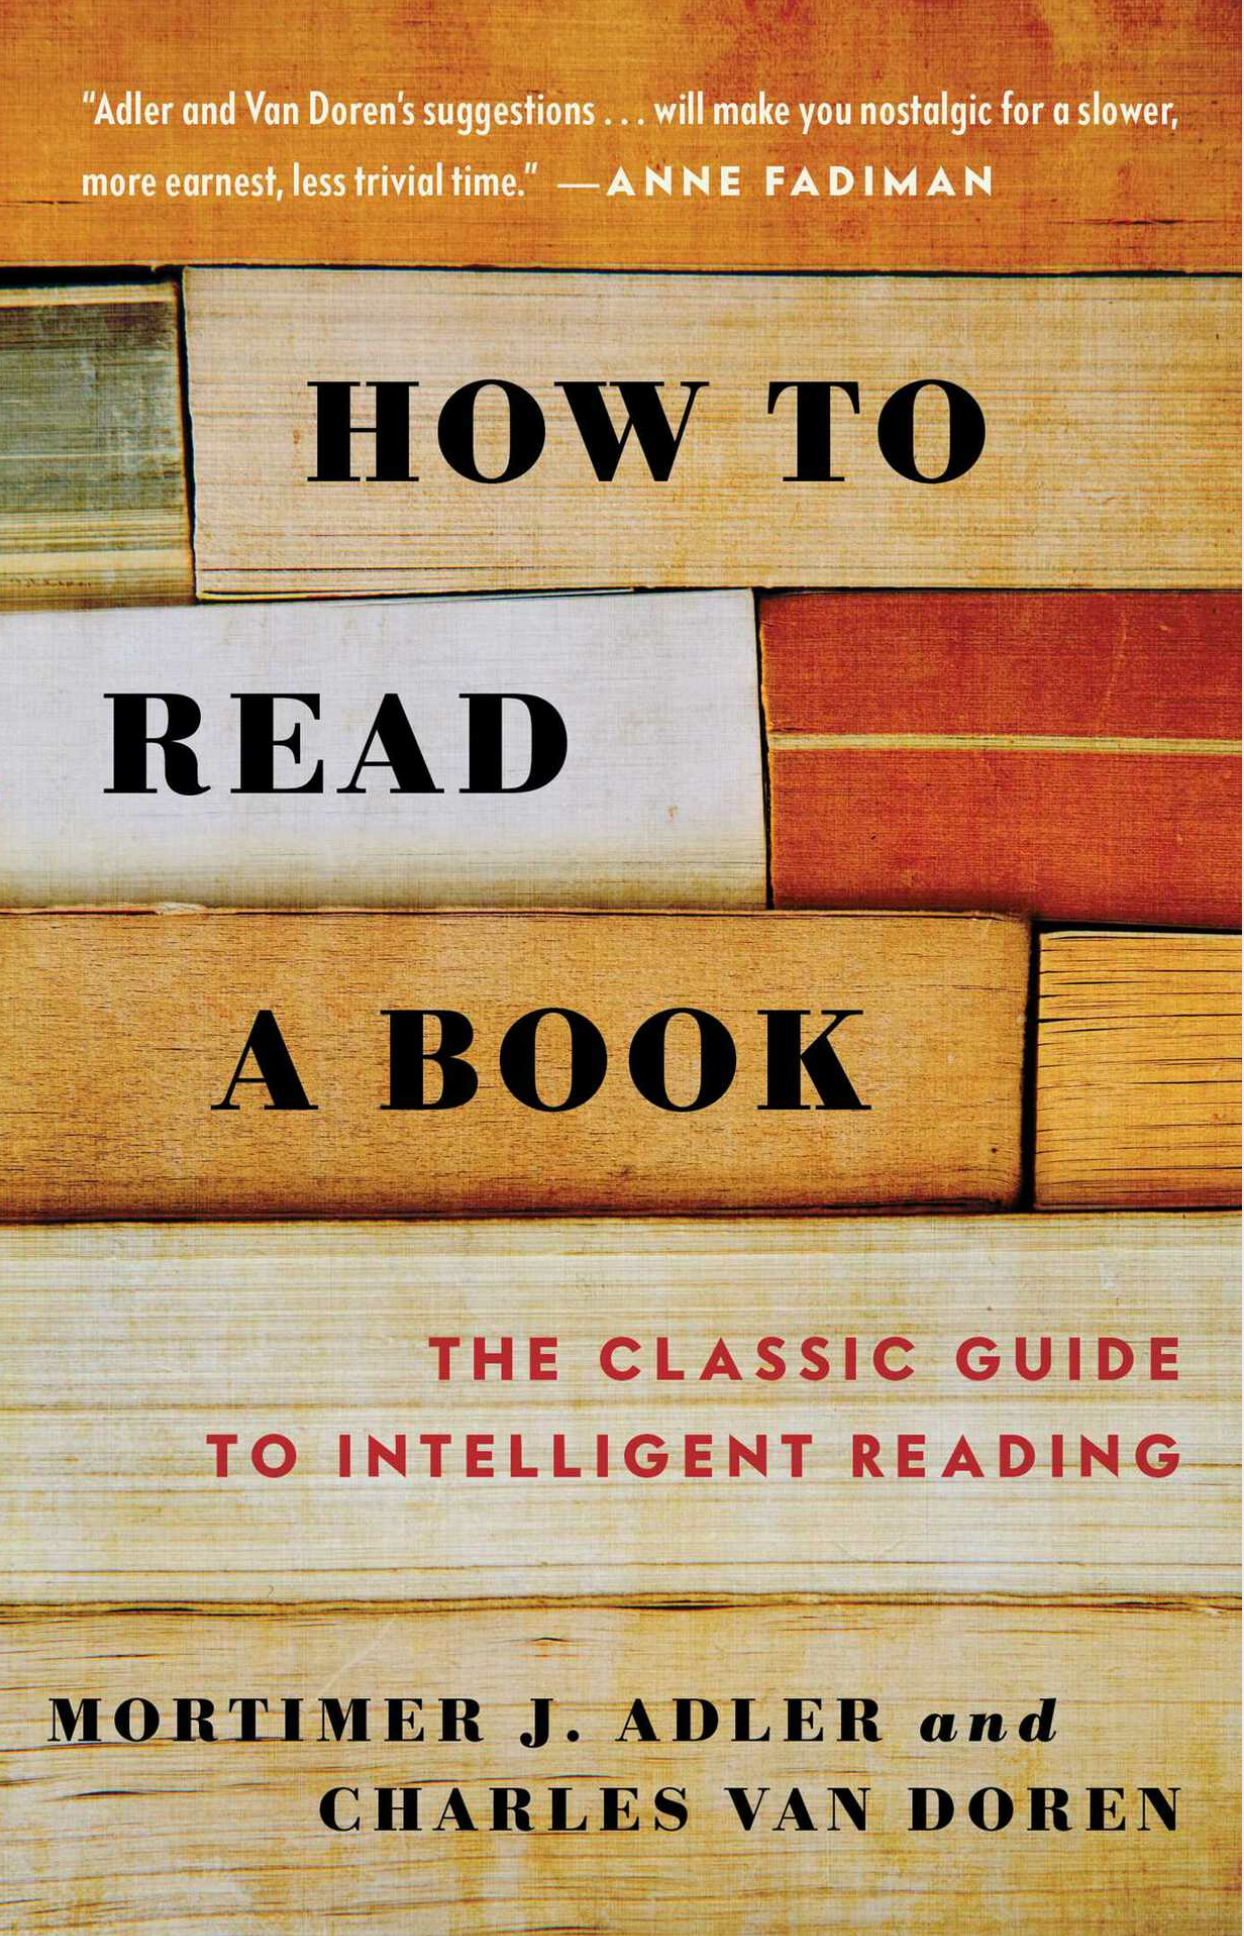 “How to Read a Book” The Classic Guide to Intelligent Reading by Mortimer J. Adler & Charles Van Doren - Book Summary